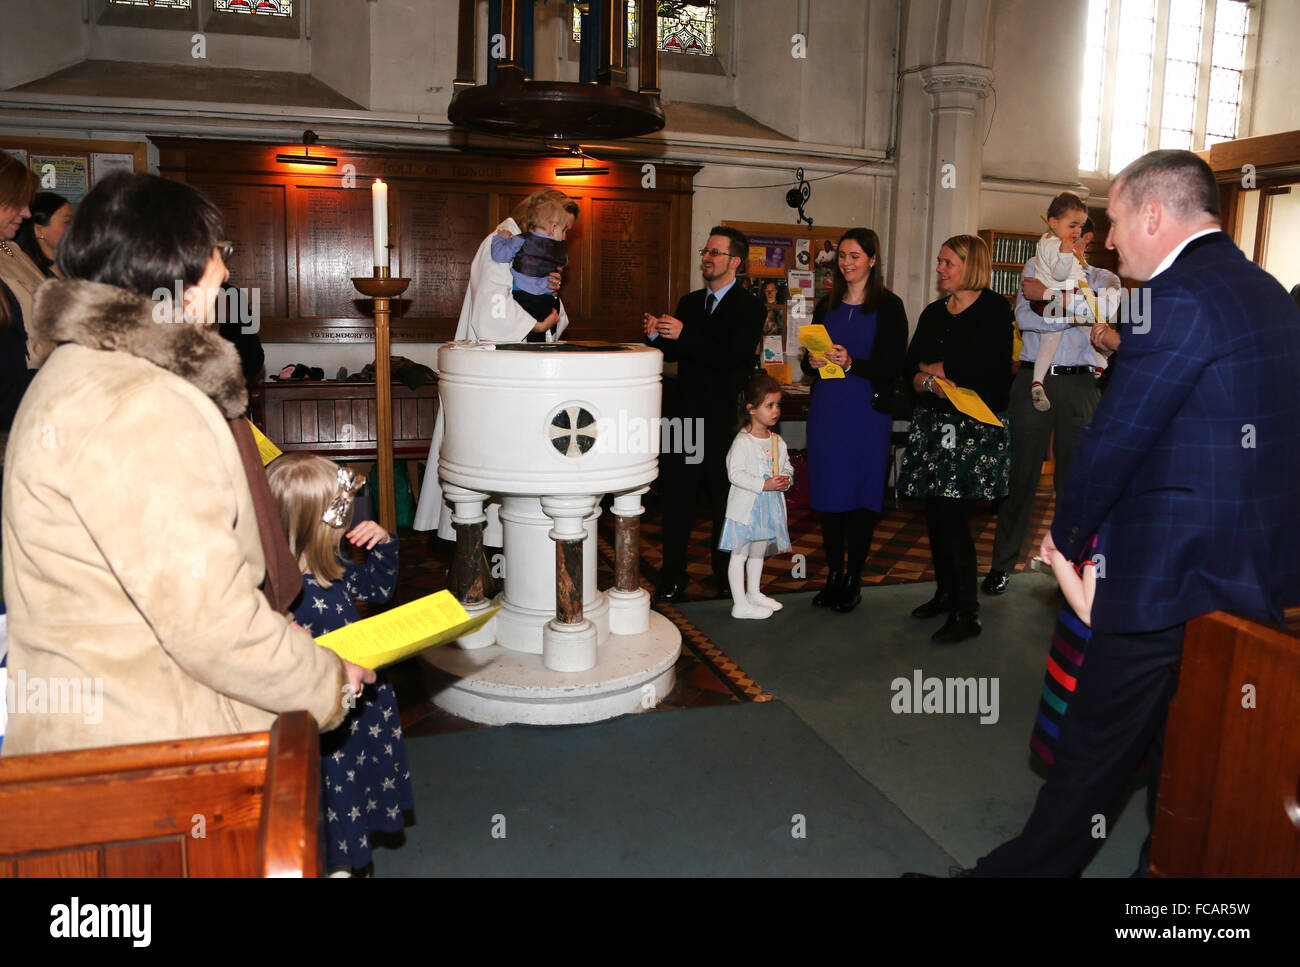 Christening At St Mary's Church Caterham On The Hill Surrey England Female Priest Holding Baby Boy By Font Stock Photo